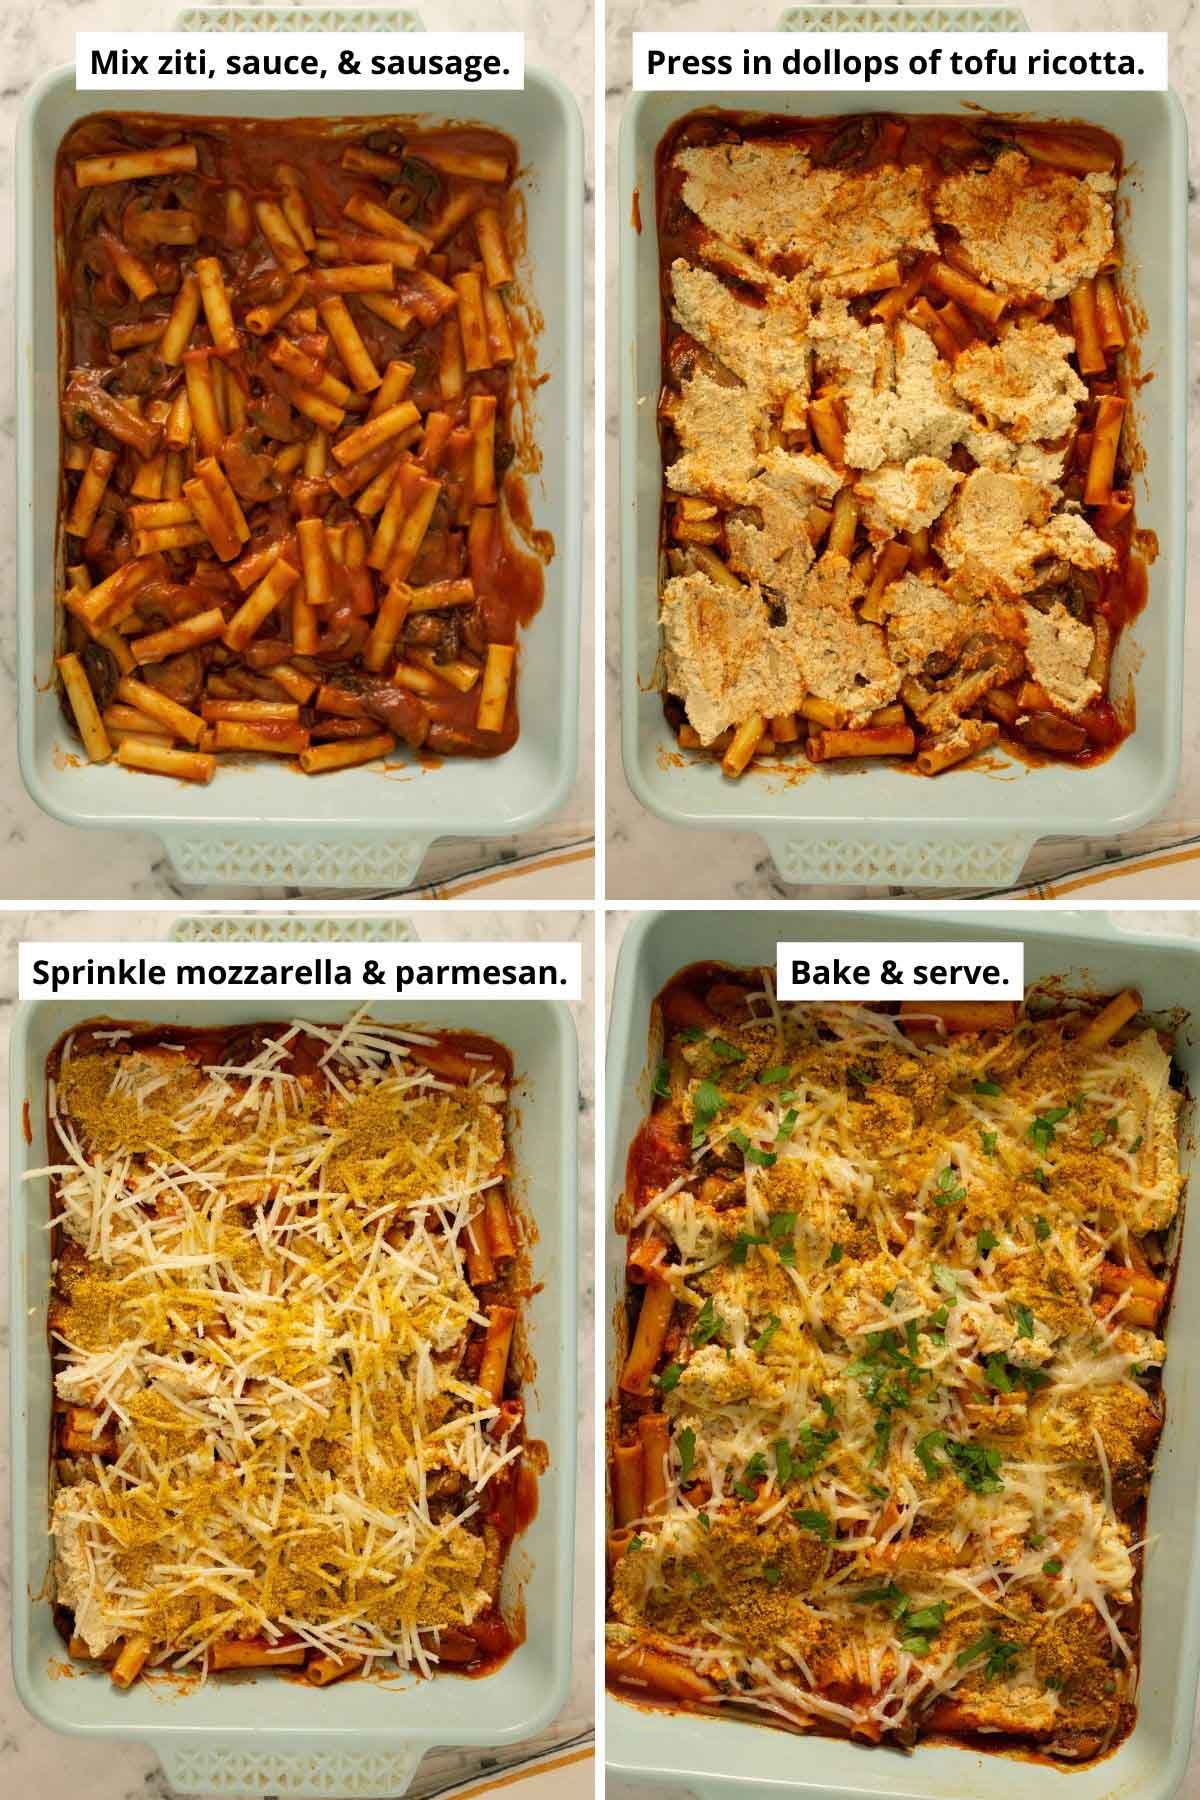 image collage showing the ziti mixed with sauce and mushrooms, how to add the tofu ricotta, topping with the other cheeses, and how it looks after baking